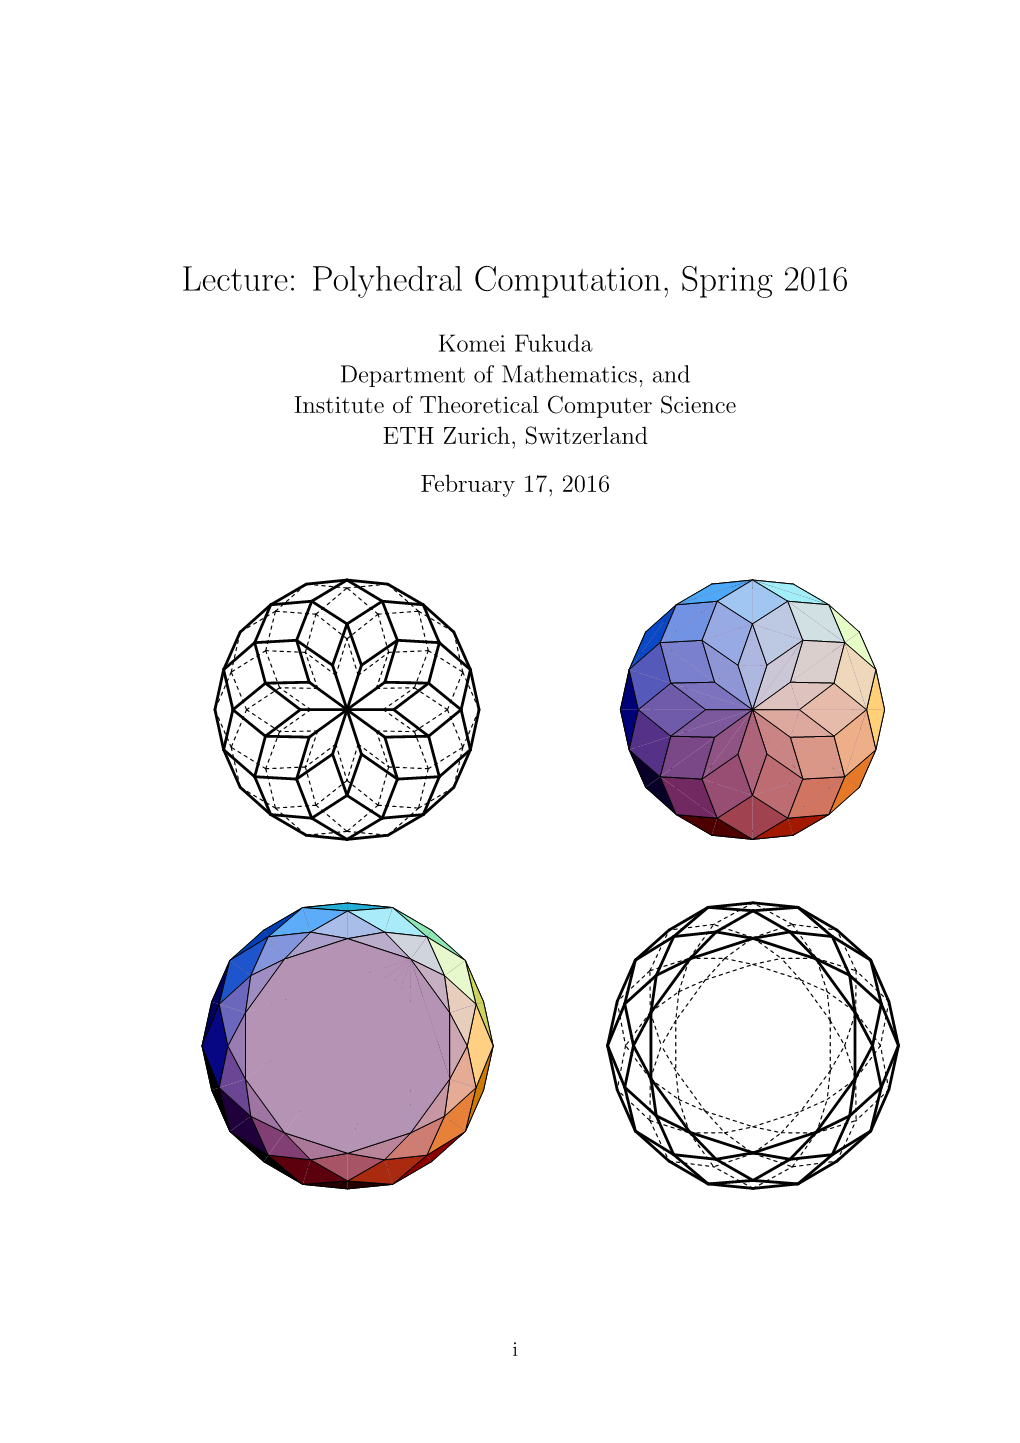 Lecture: Polyhedral Computation, Spring 2016